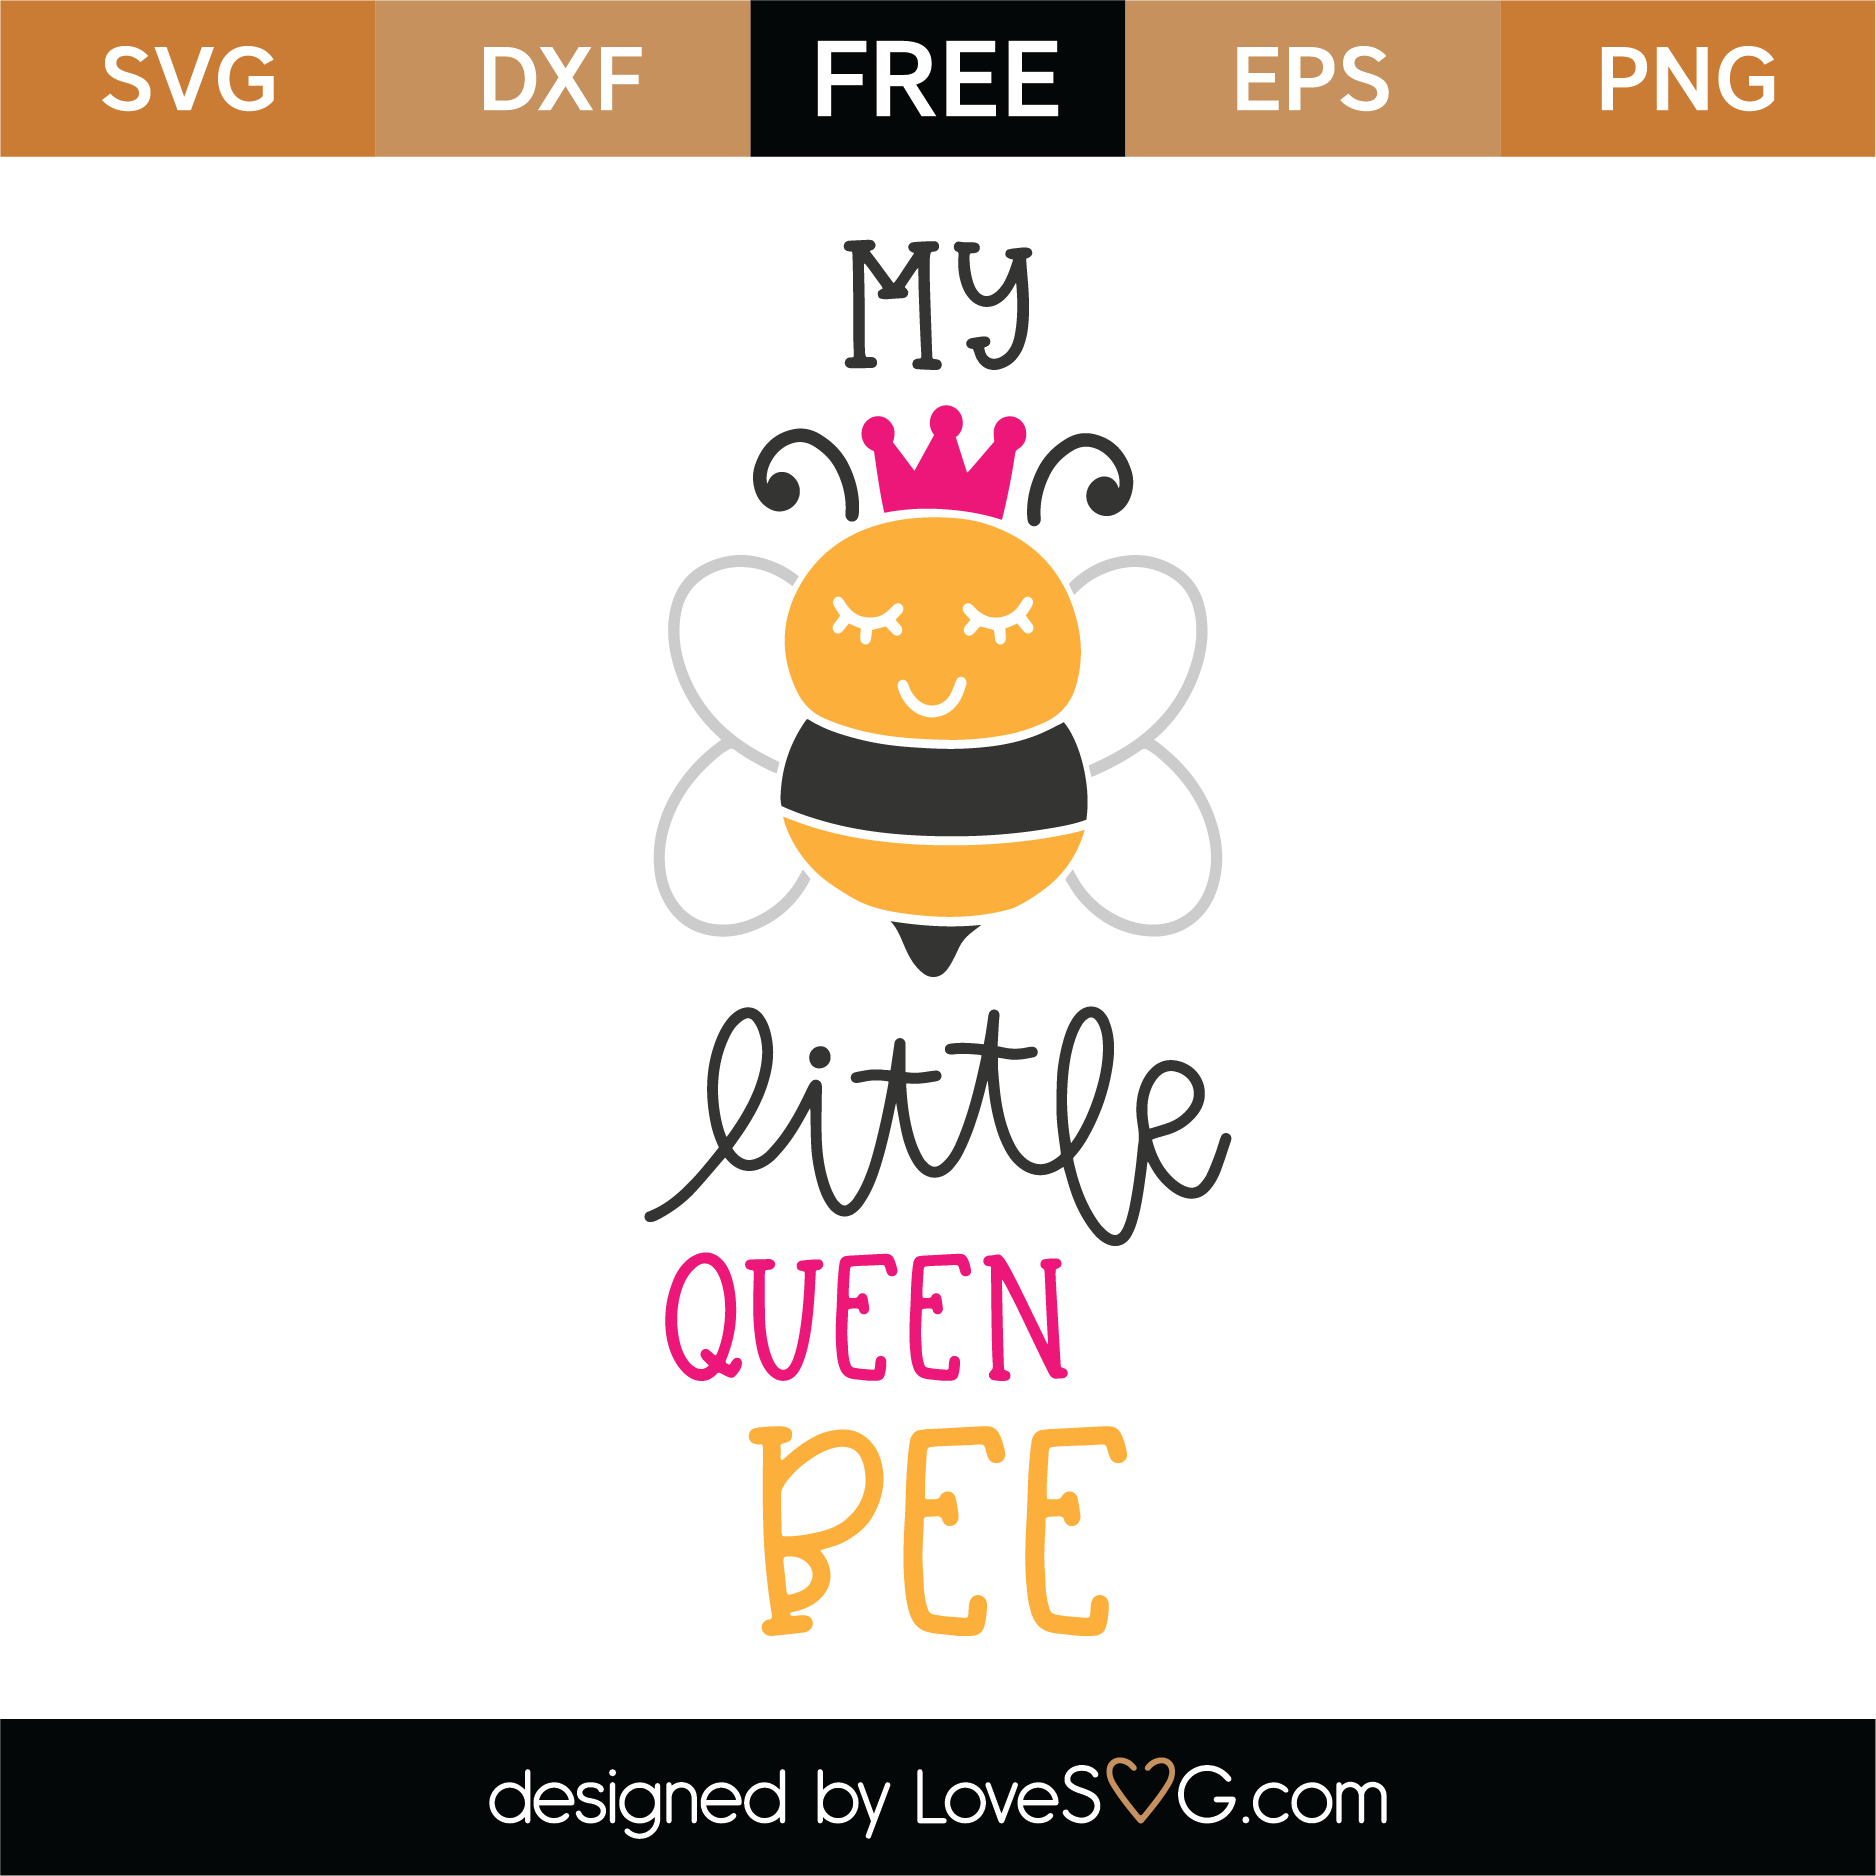 Download Free My Little Queen Bee SVG Cut File | Lovesvg.com